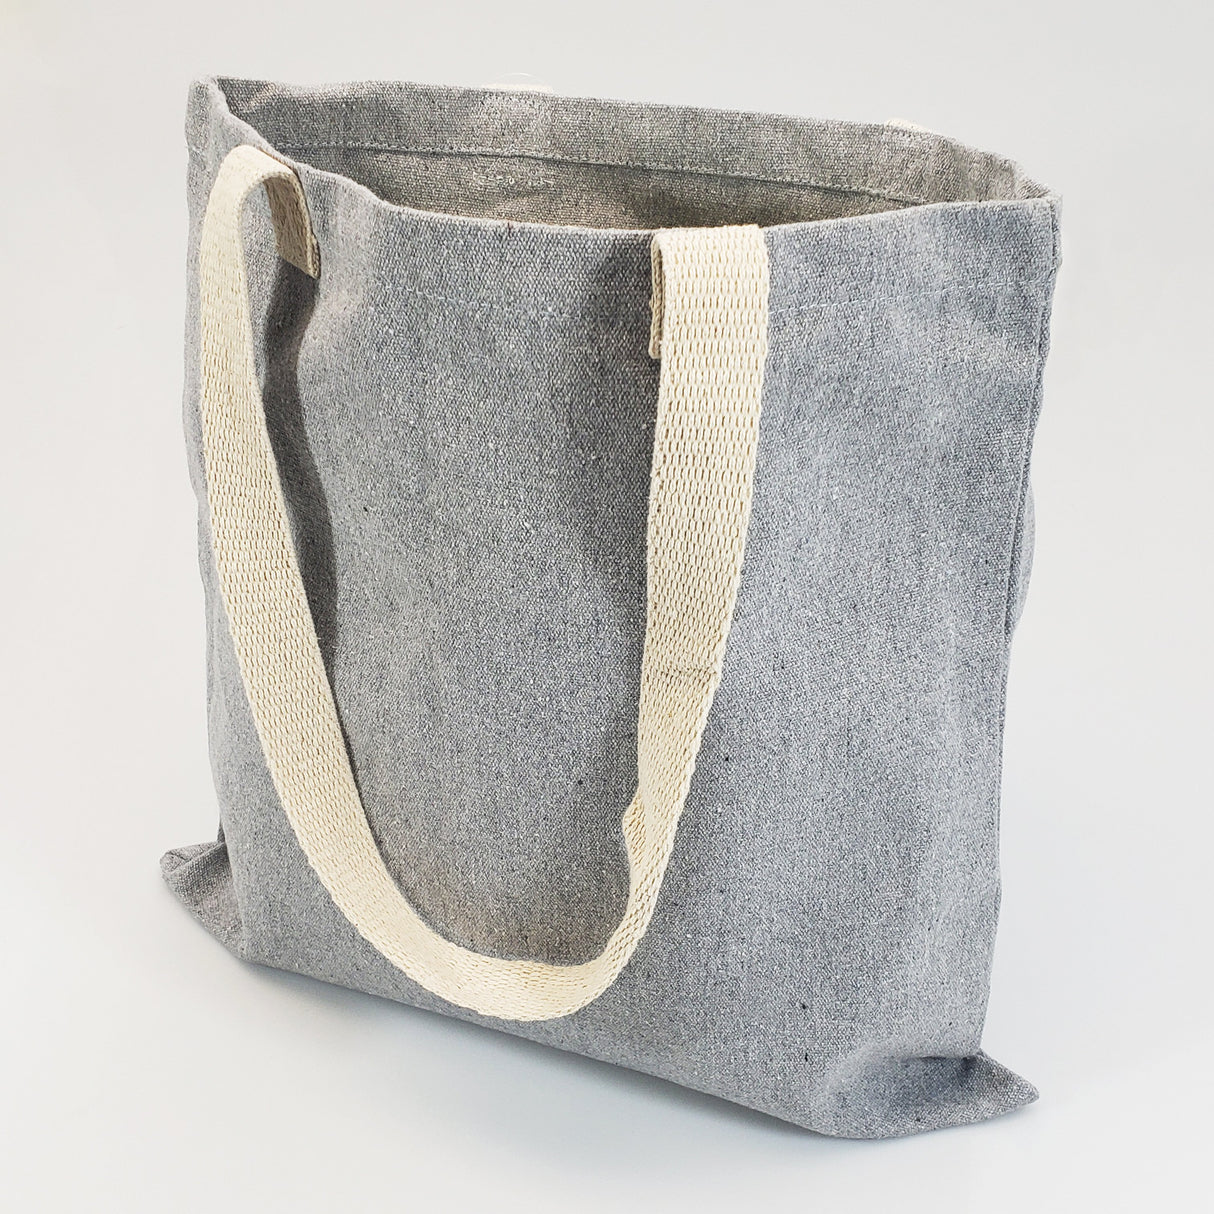 shopping bags with recycled material